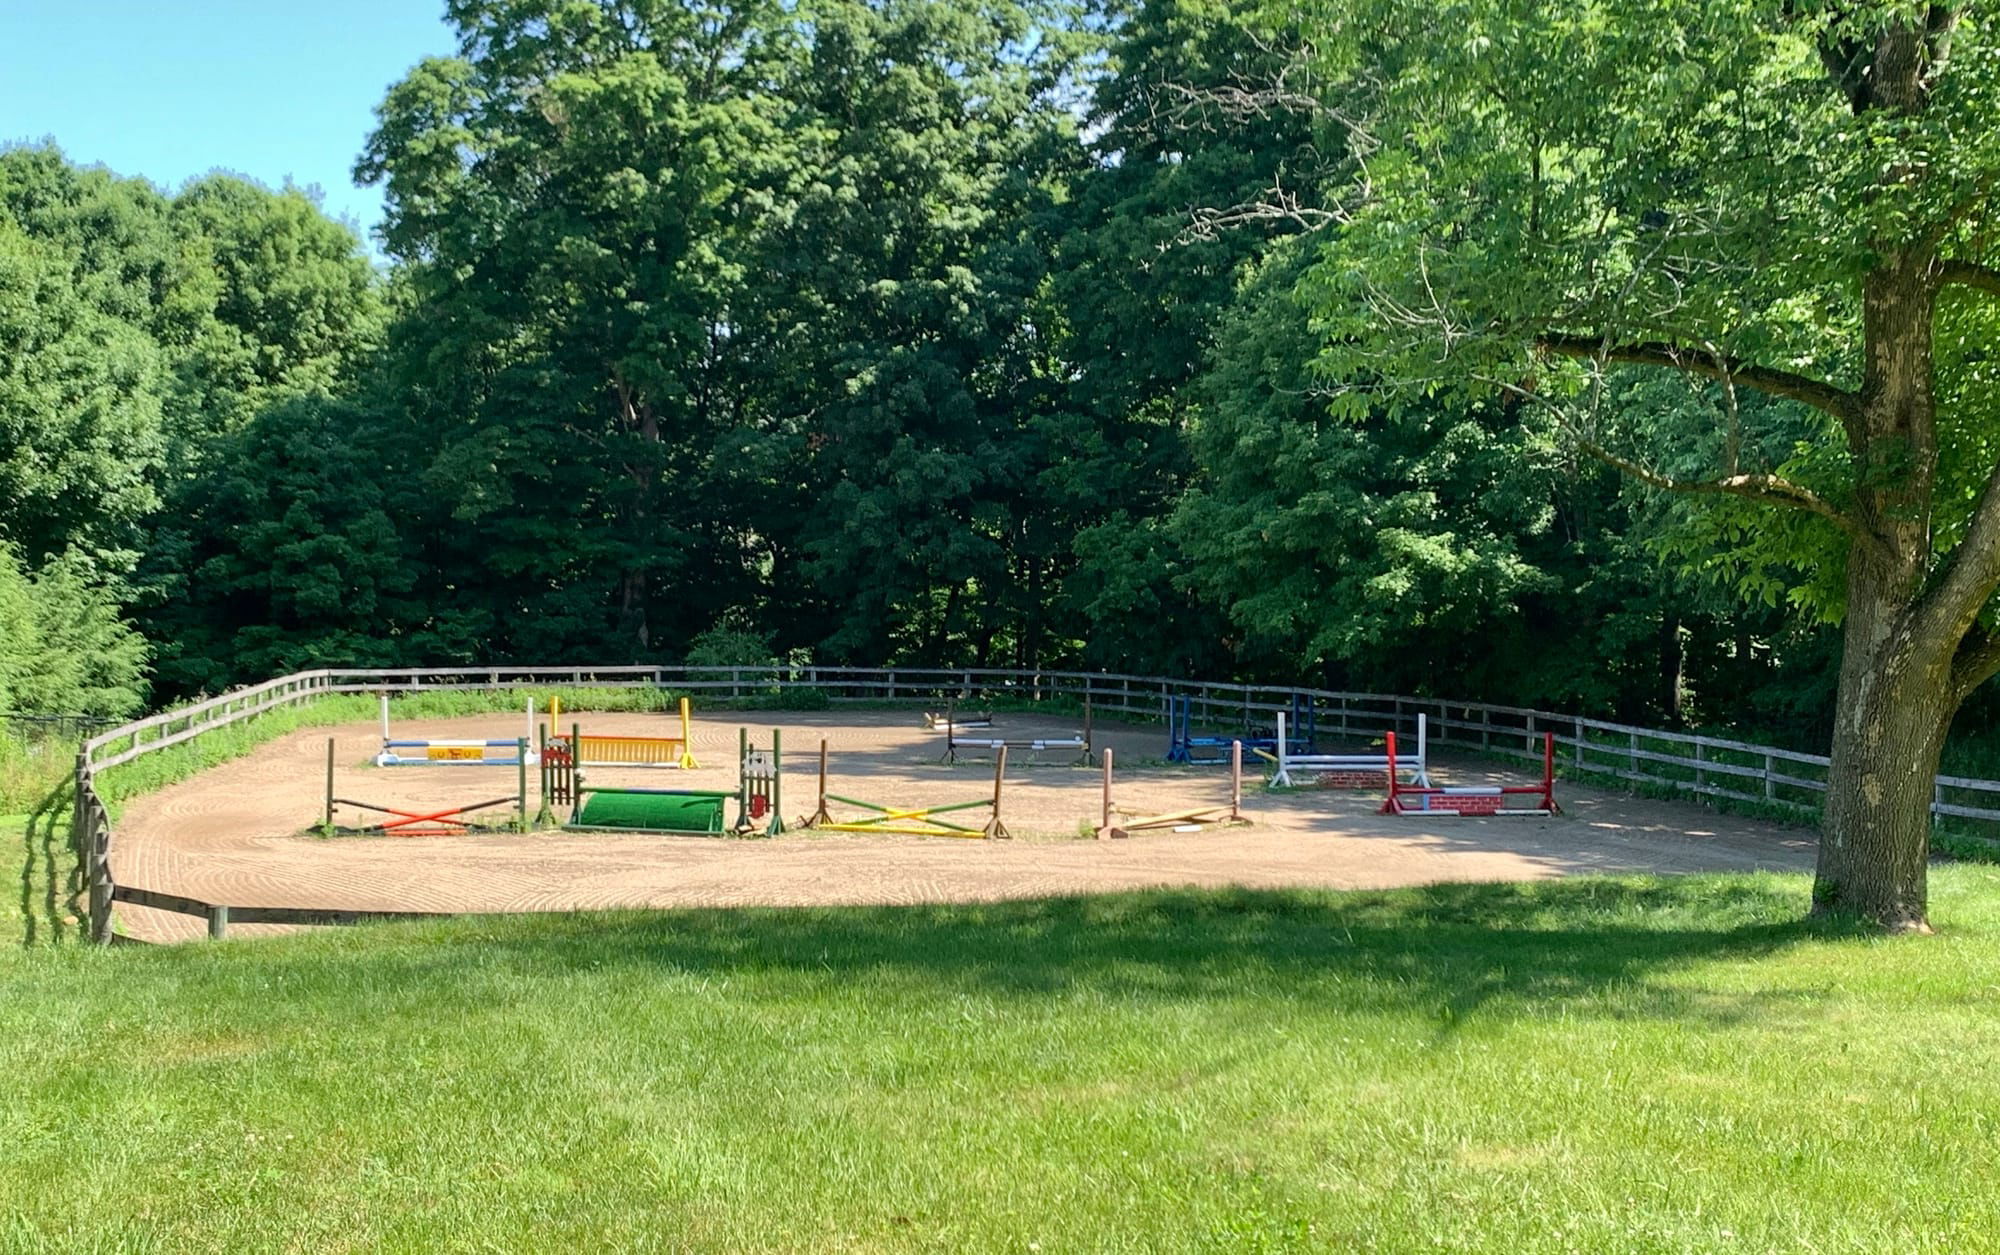 Outdoor Riding Ring